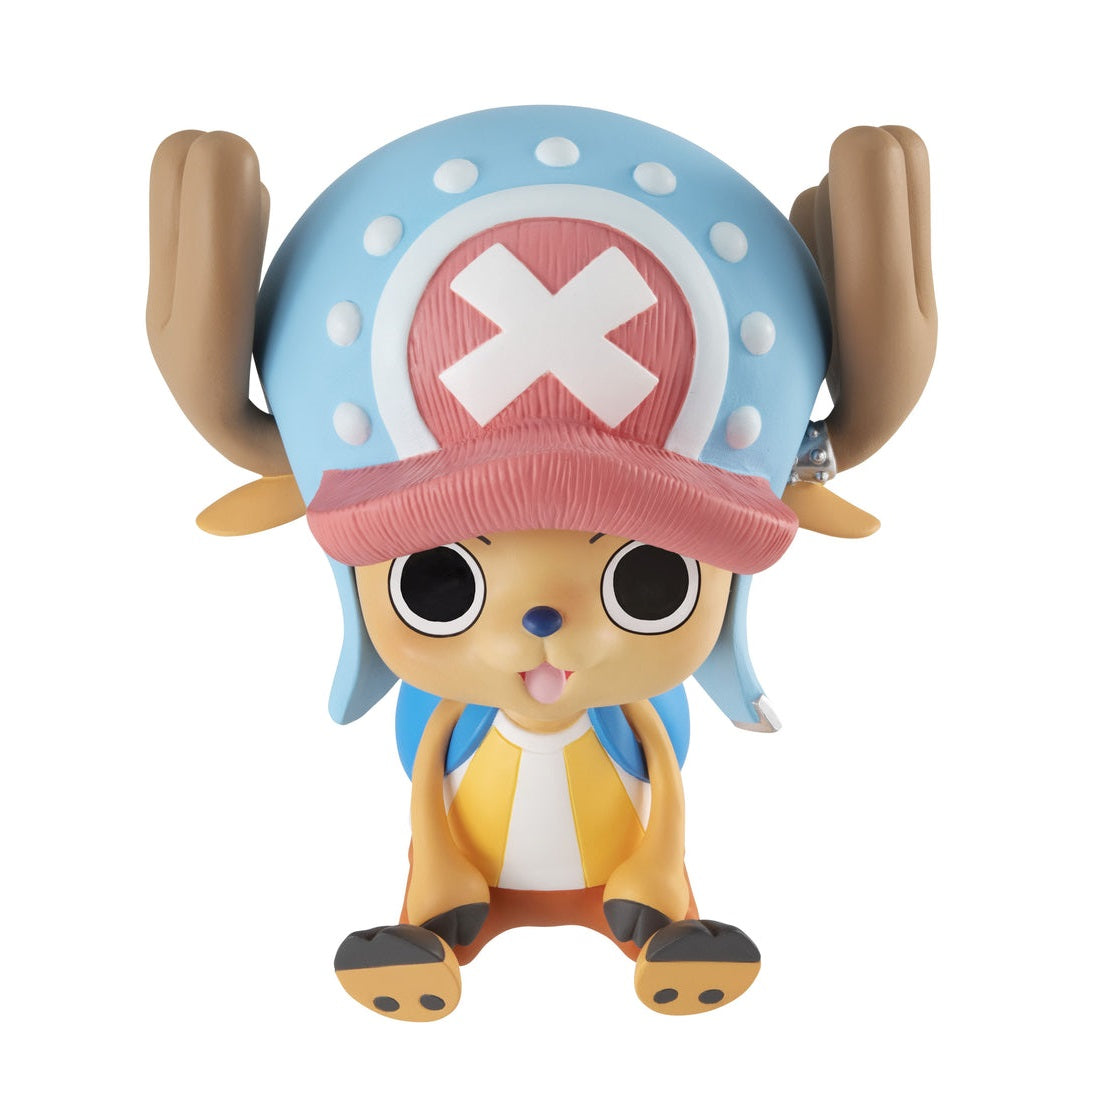 One Piece -Look Up Series- "Tony Tony Chopper"-MegaHouse-Ace Cards & Collectibles